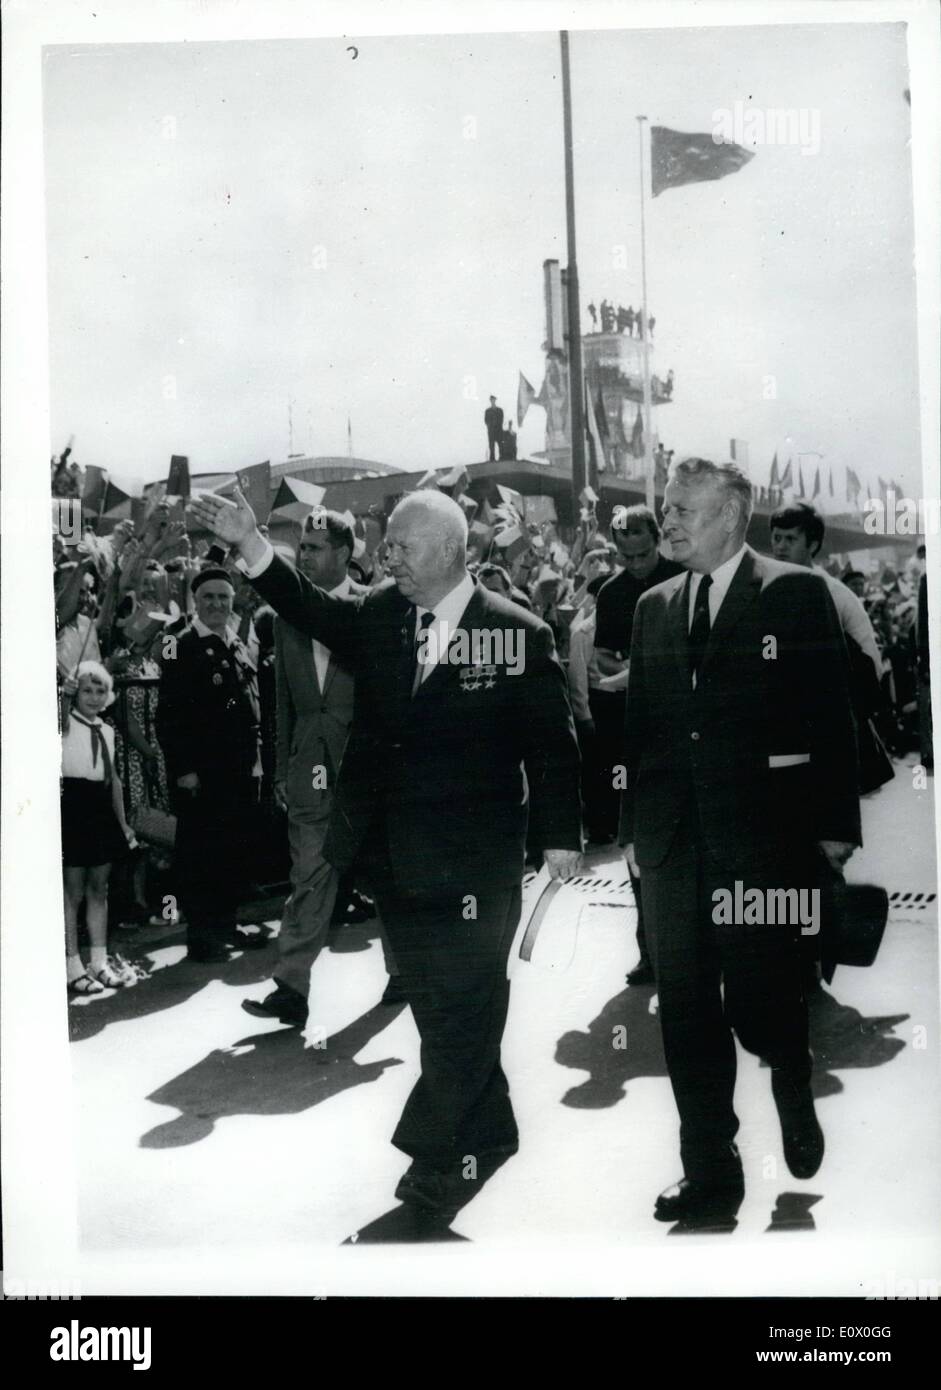 Sep. 09, 1964 - 1-9-64 Mr. Khruschev arrives in Prague. Headed by Mr. Khruschev a Soviet delegation arrived in Prague to attend the celebrations of the 20th Anniversary of the Slovak National Uprising, the chief assembly being at the Banska Bystrica, Central Slovakia. Keystone Photo Shows: Mr. Khruschev acknowledges the greeting as he walks with Czech President A. Novotny on his arrival at Prague Ruzyne airport. Stock Photo